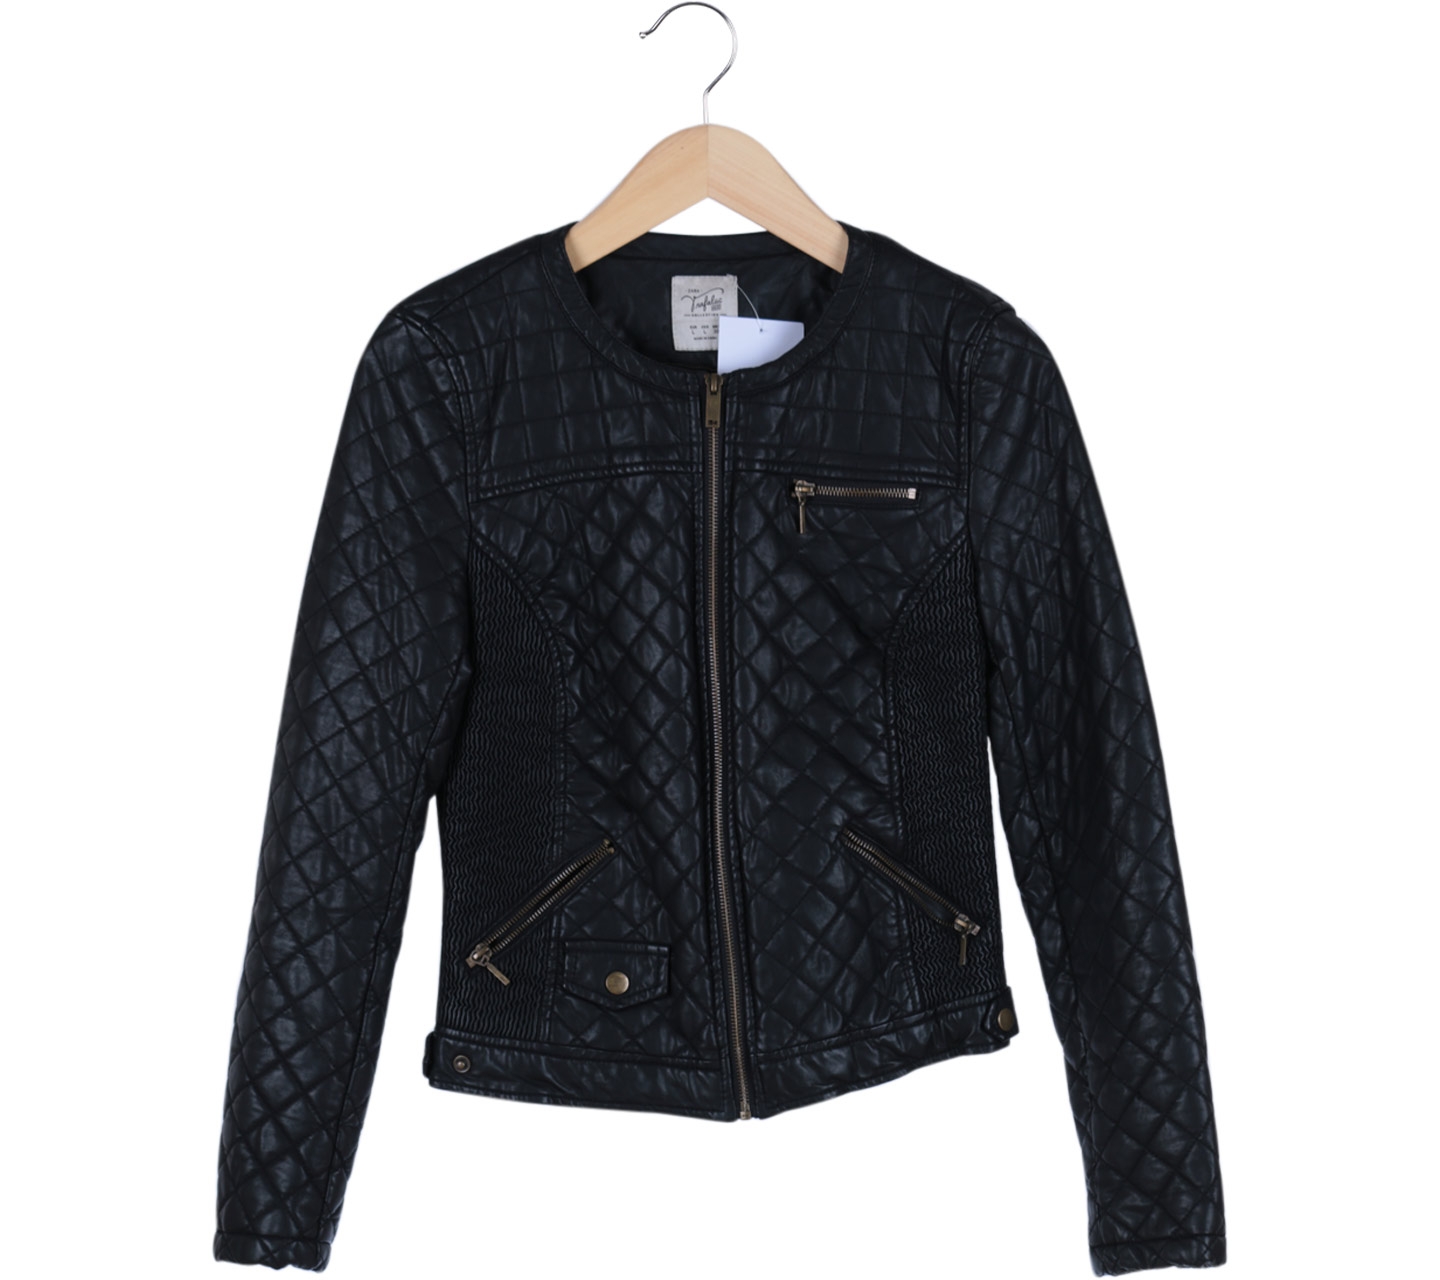 Zara Black Quilted Leather Jacket